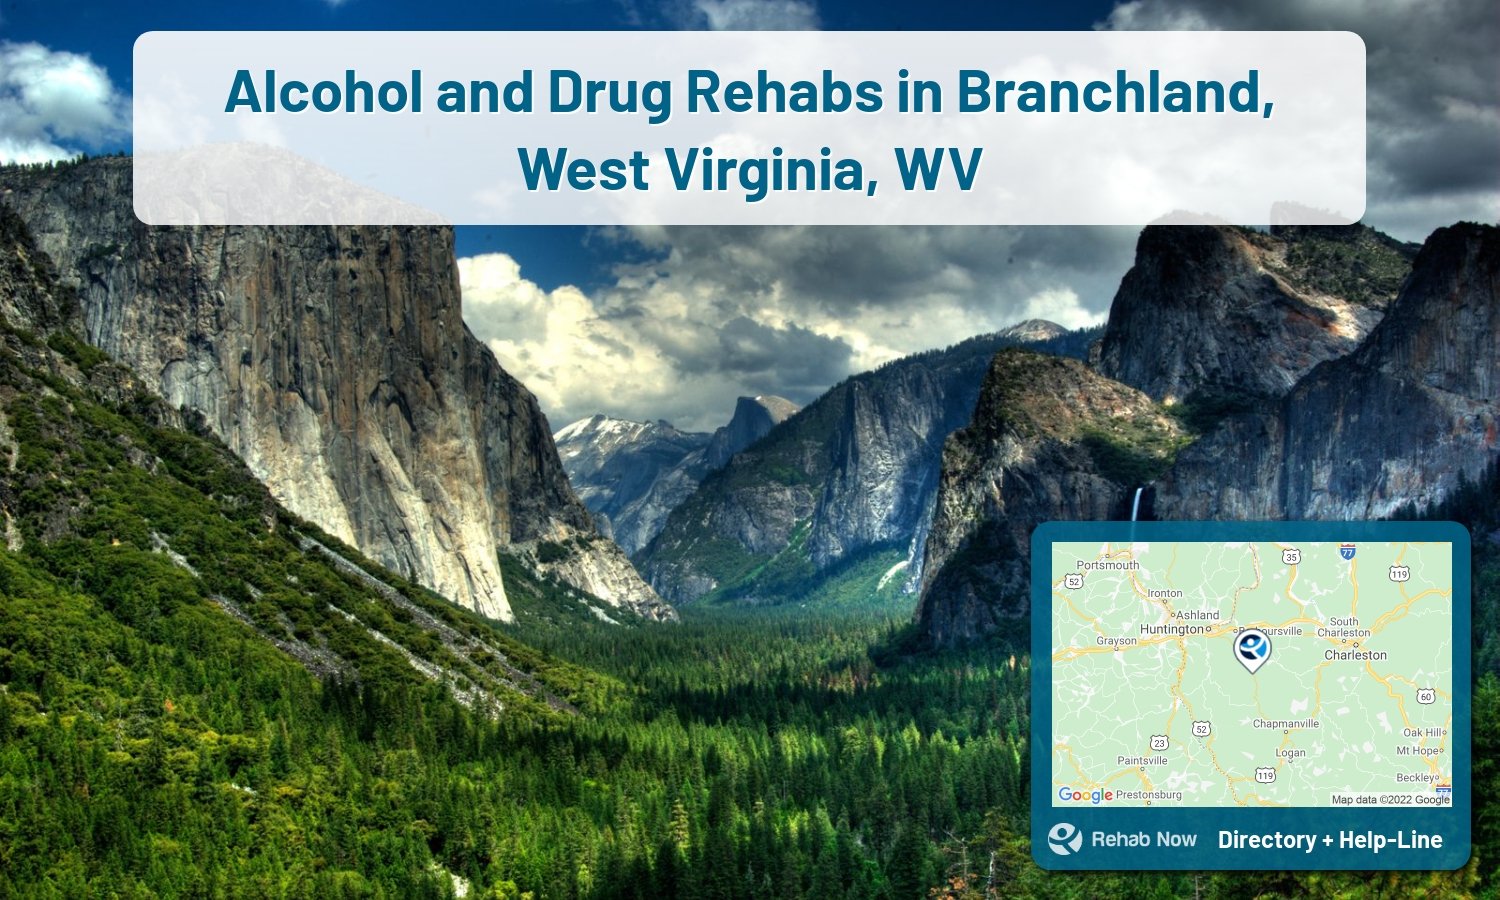 Let our expert counselors help find the best addiction treatment in Branchland, West Virginia now with a free call to our hotline.